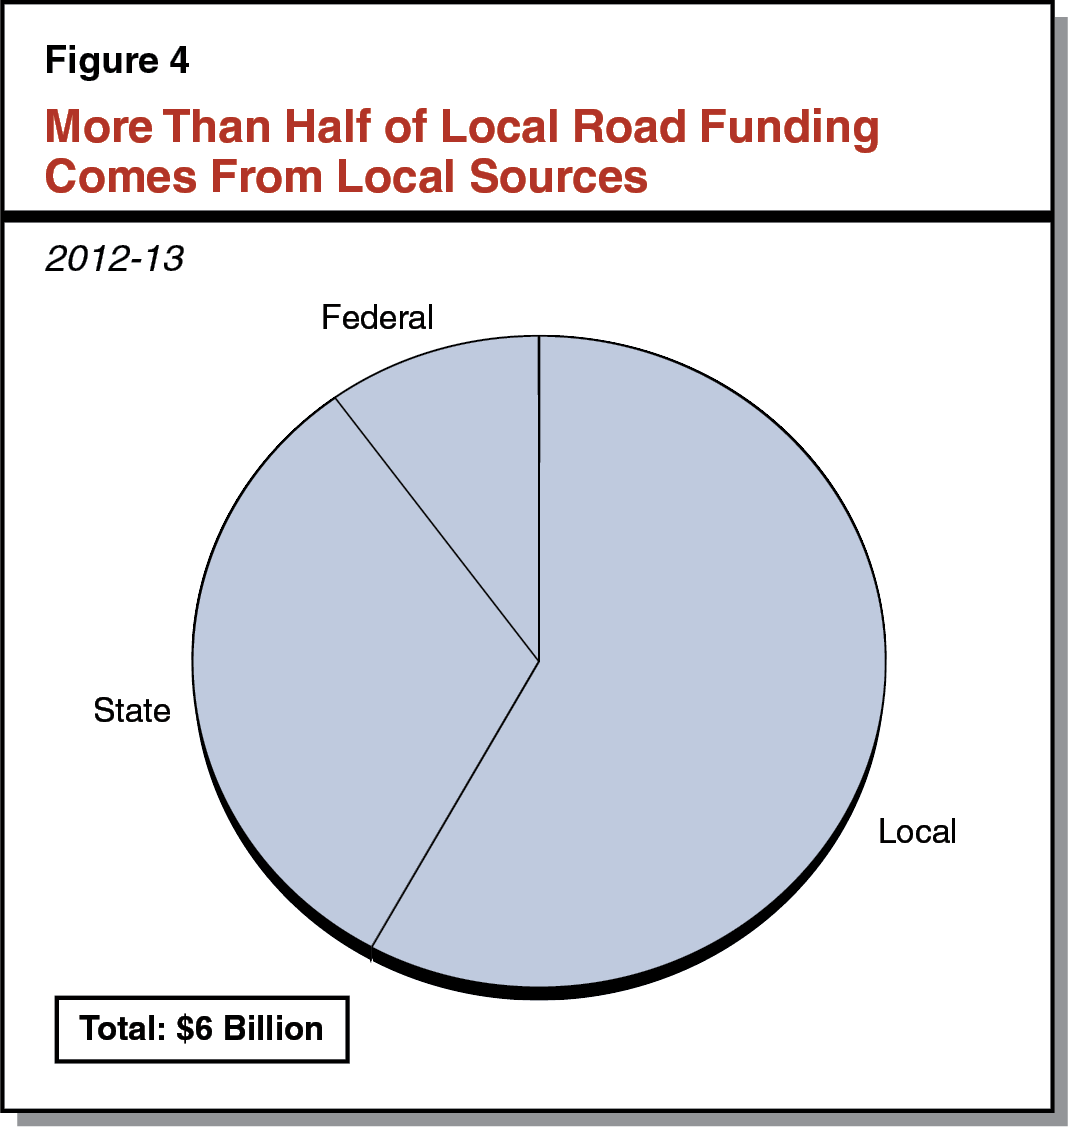 Figure 4 - More Than Half of Local Road Funding Comes From Local Sources